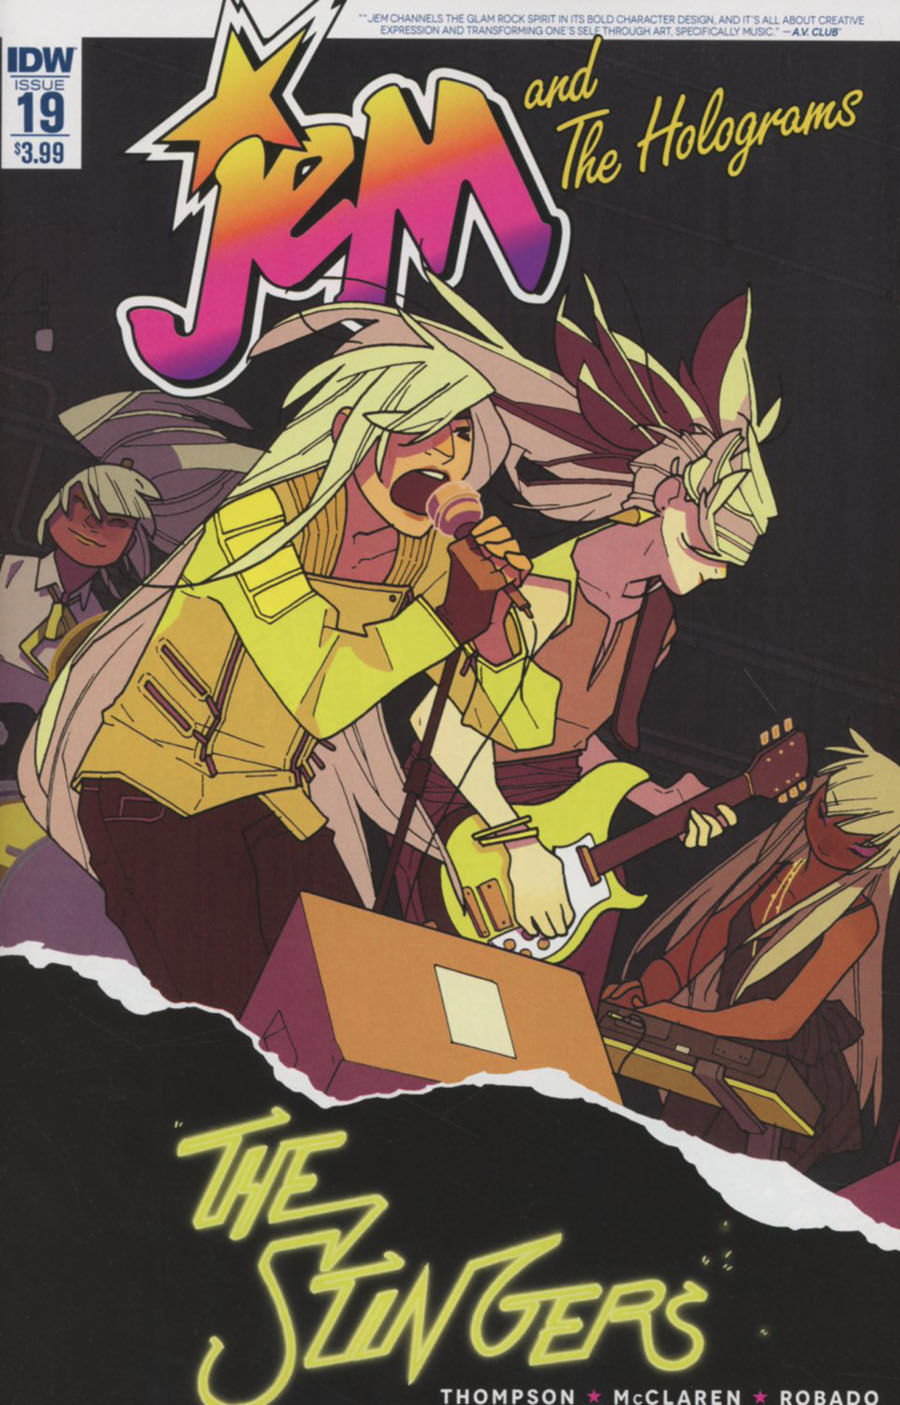 Jem And The Holograms #19 Cover A Regular Meredith McClaren Cover